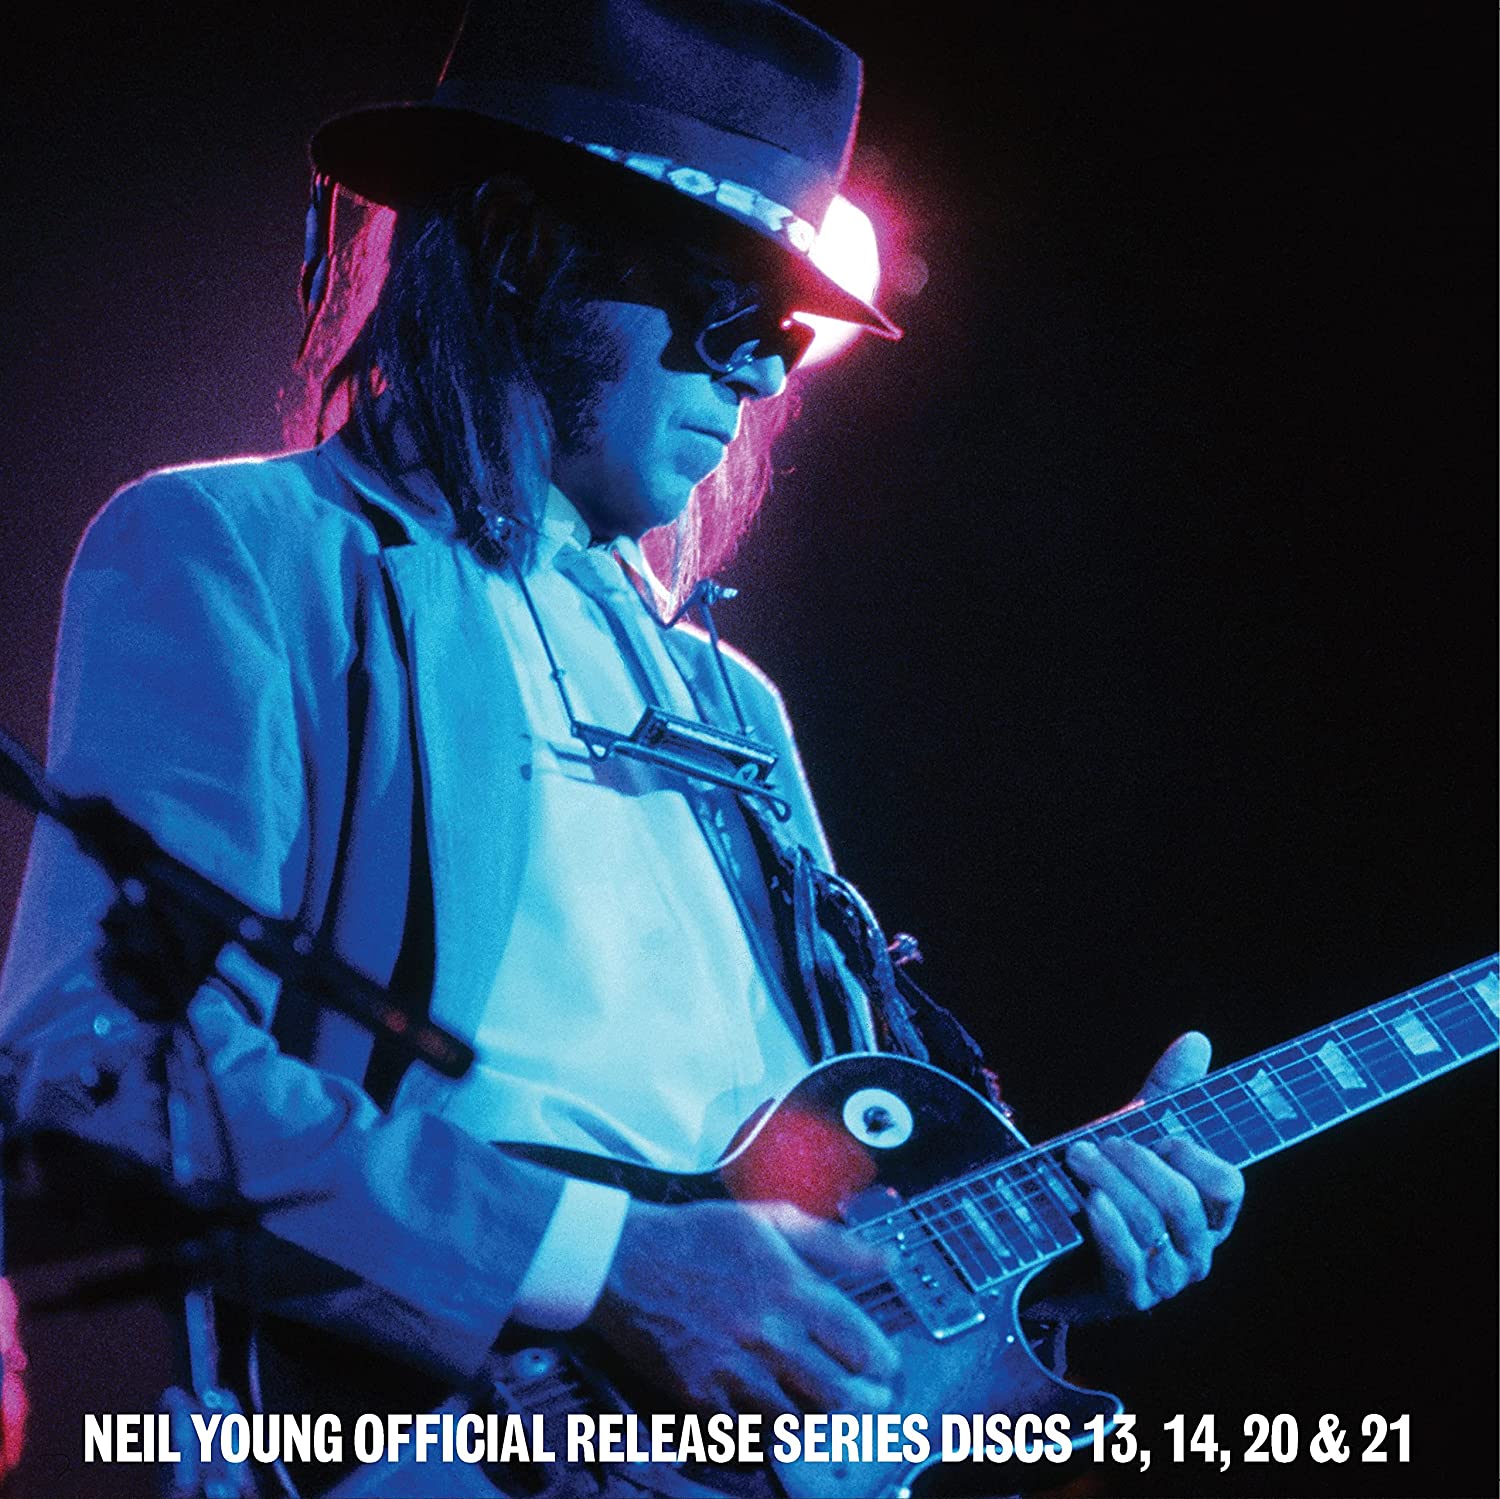 Young, Neil Official Release Series Discs 13, 14, 20 & 21